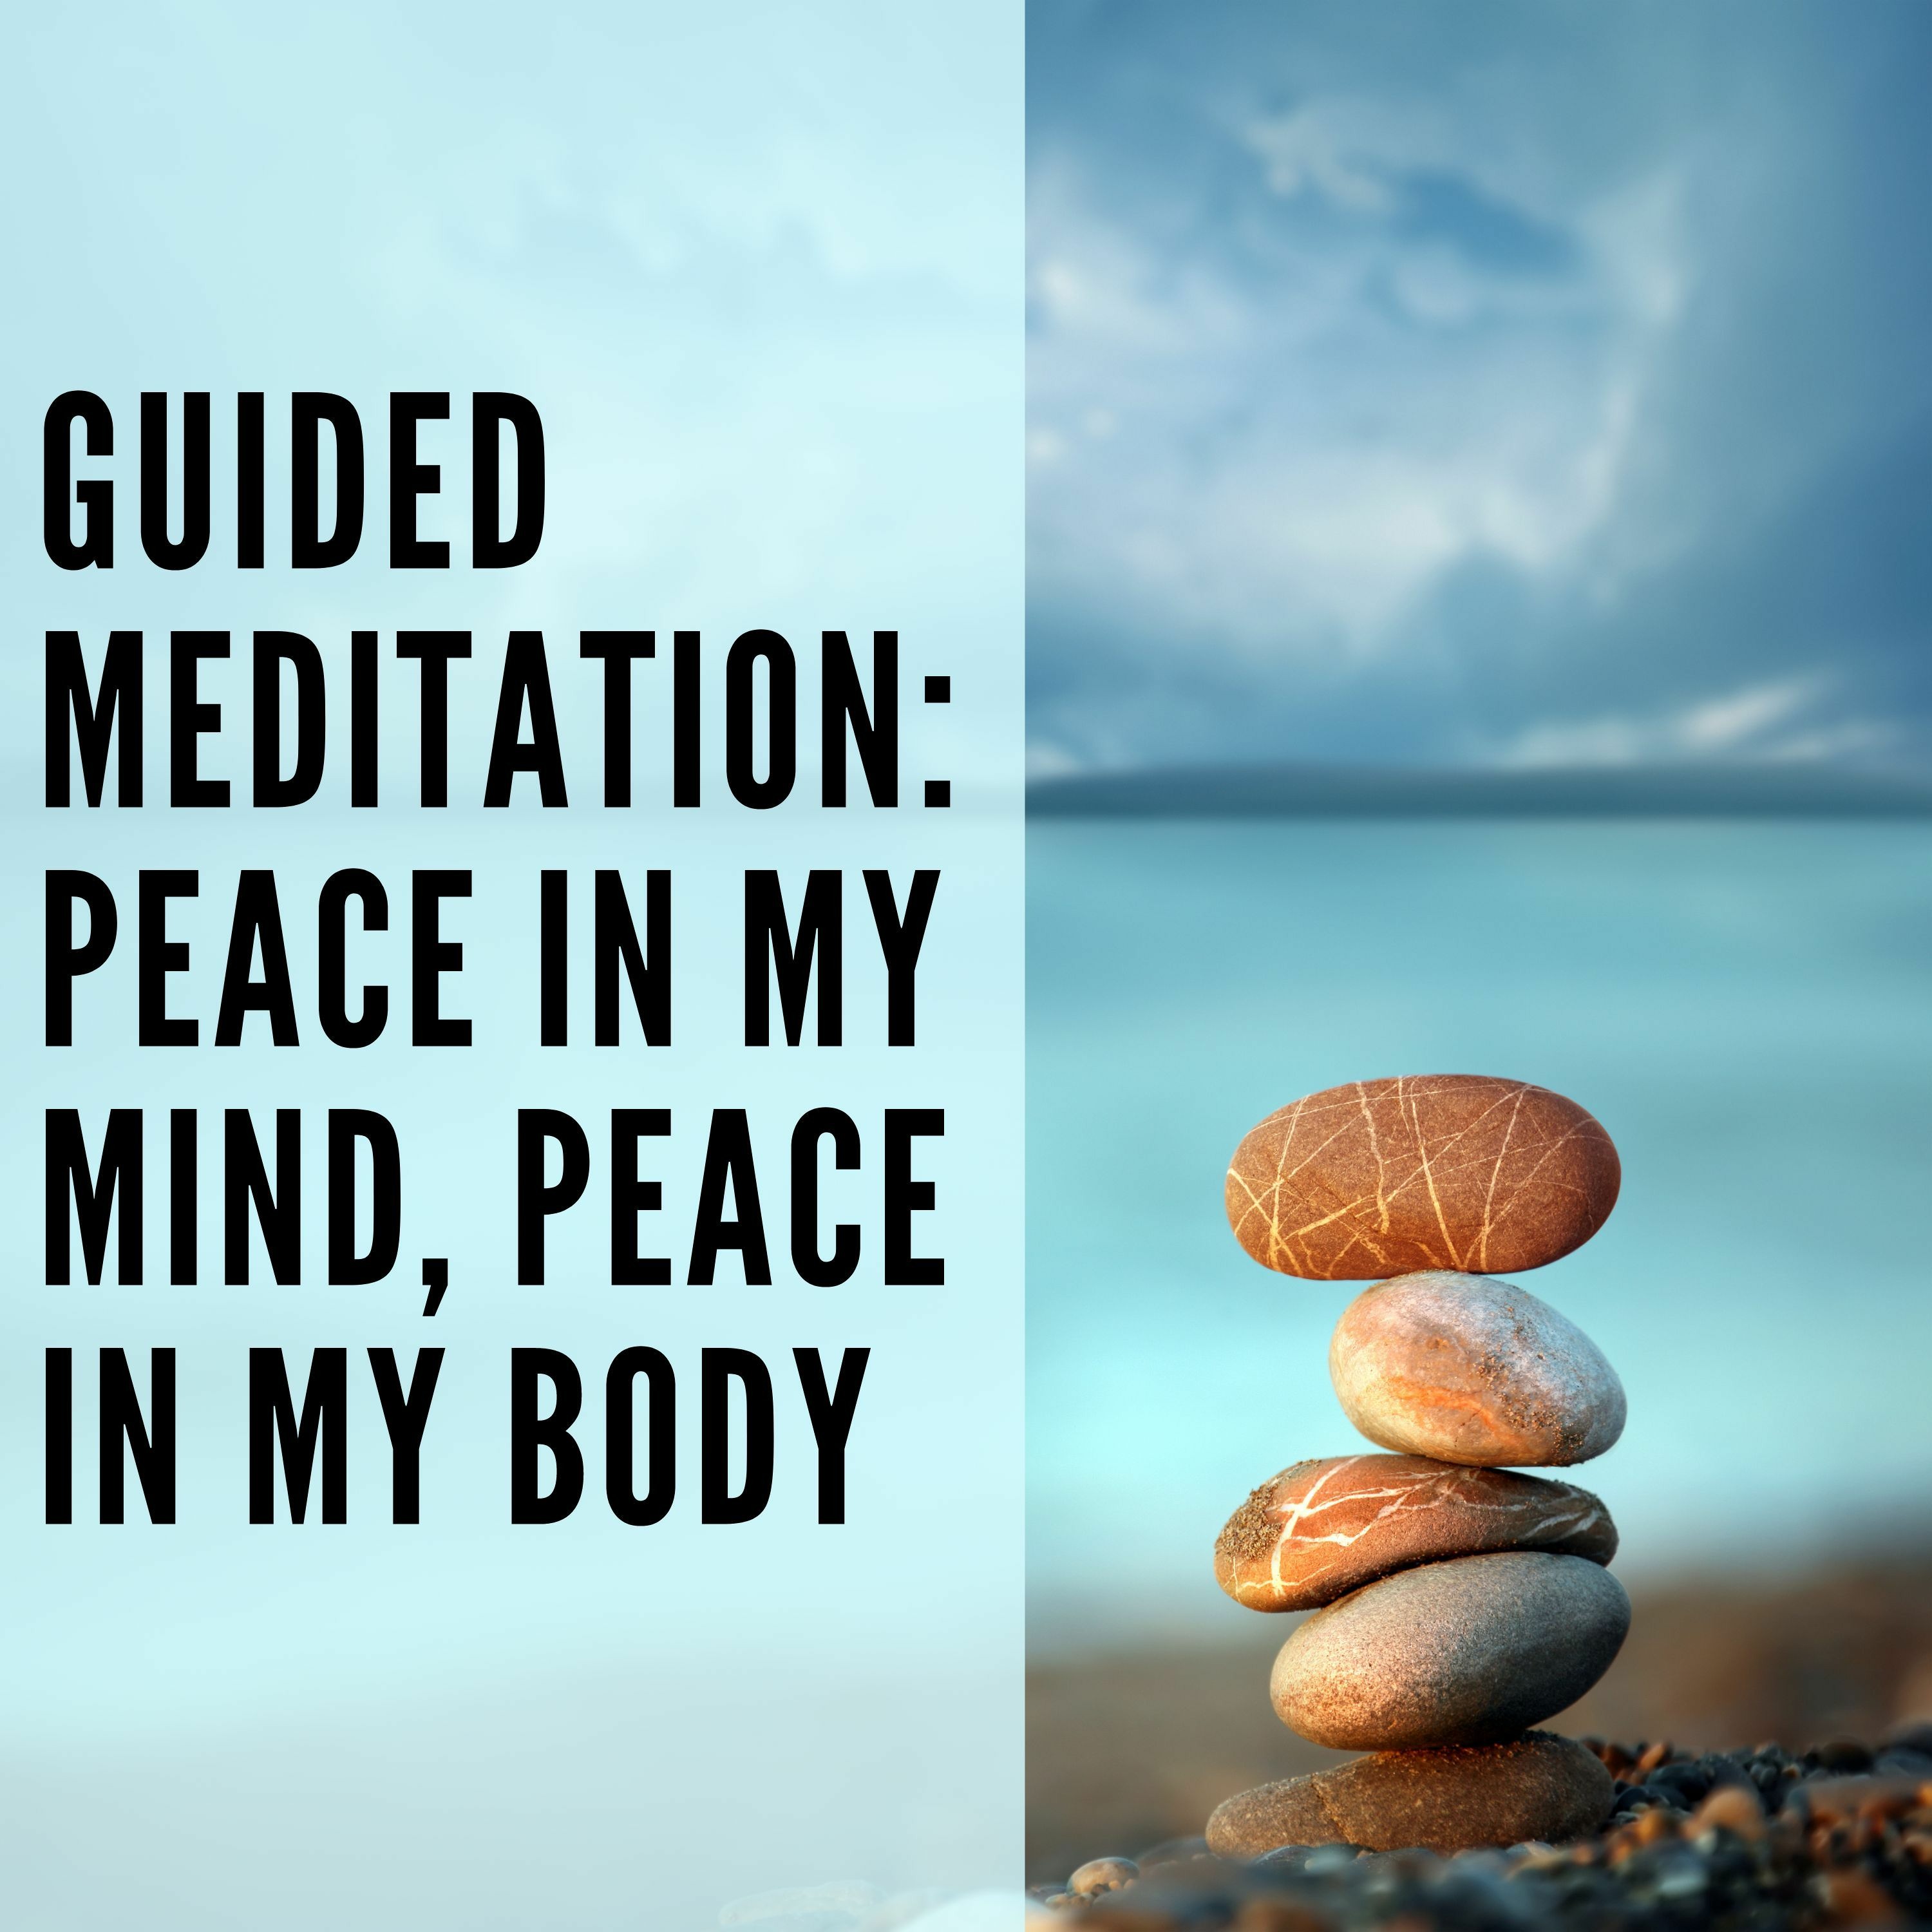 99 // Guided Meditation: Peace In My Mind, Peace In My Body